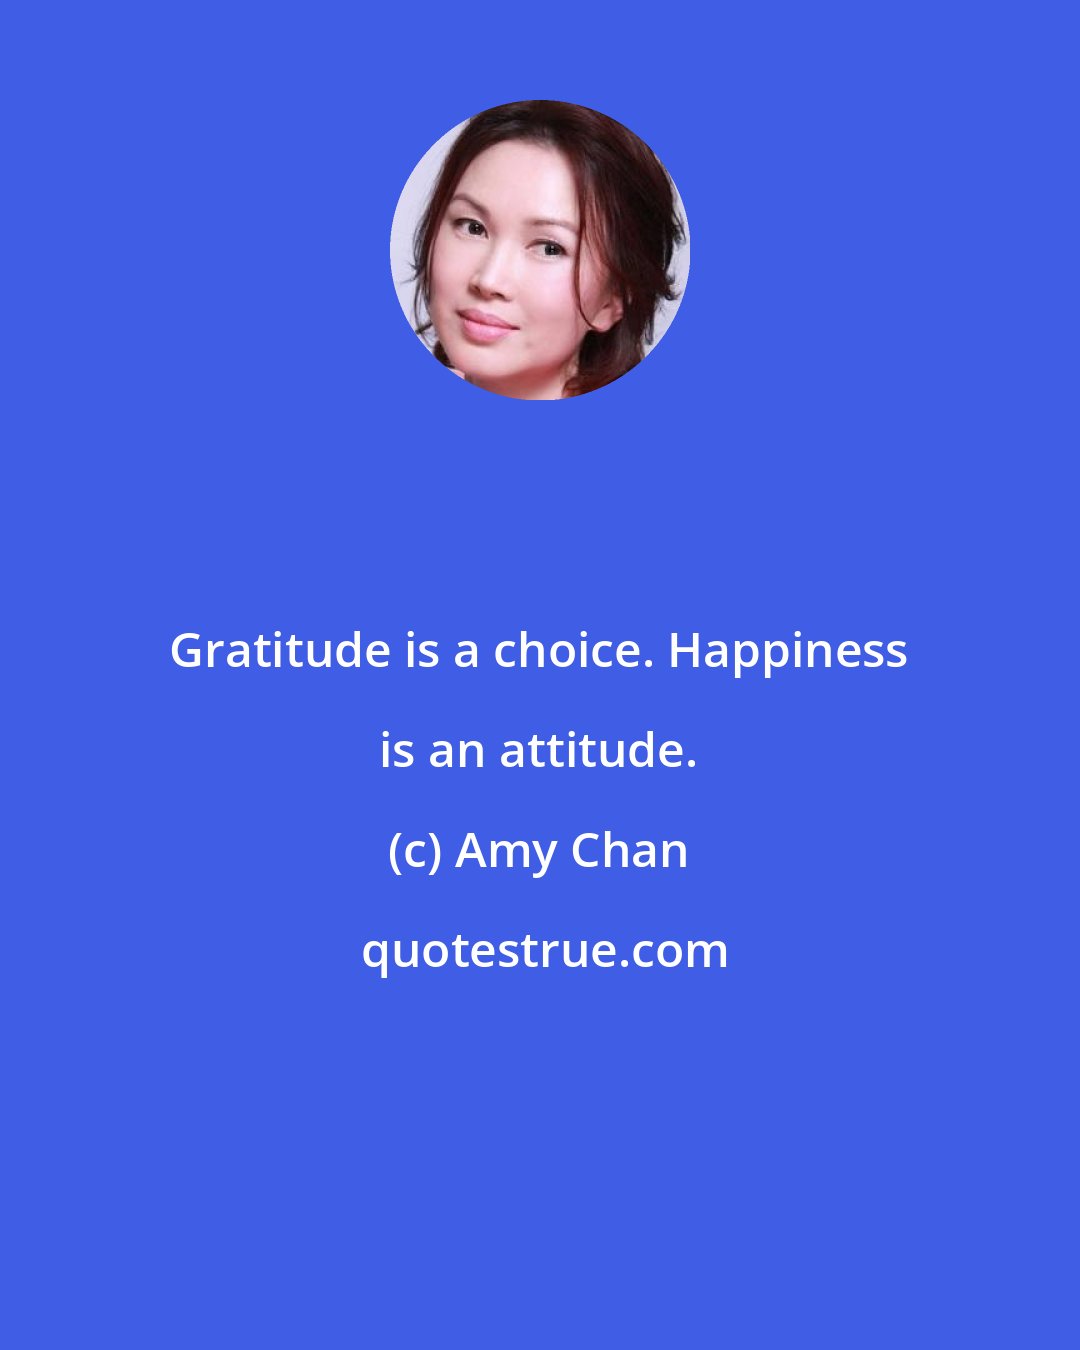 Amy Chan: Gratitude is a choice. Happiness is an attitude.